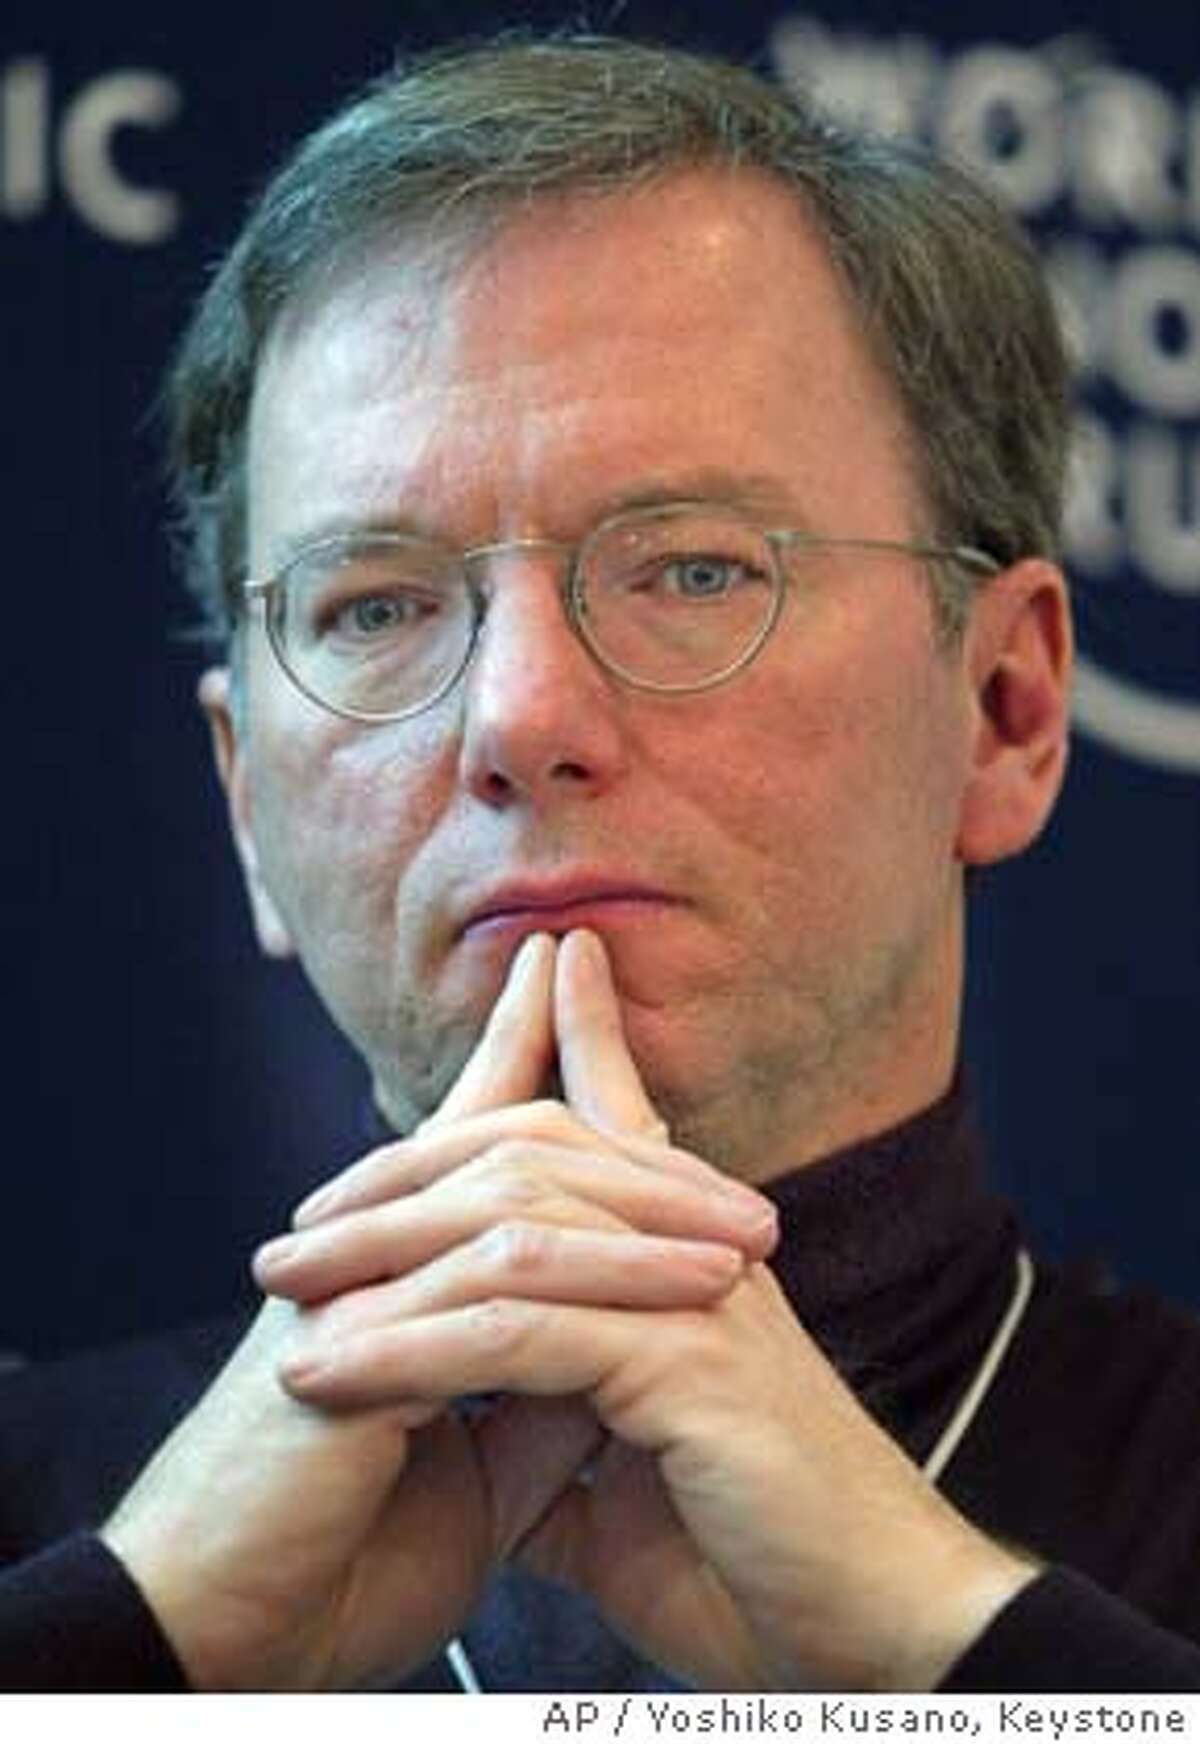 Eric Schmidt, CEO of Google, USA, participates in a panel session at the Annual Meeting of the World Economic Forum in Davos, Switzerland, Friday, Jan. 23, 2004. (AP Photo/ Keystone, Yoshiko Kusano) Ran on: 12-02-2004 Eric Schmidt, Googles chief executive, is pleased with the IPOs run-up. Ran on: 04-09-2005 The painted ladies are on a journey north to Canada. Ran on: 04-09-2005 The painted ladies are on a journey north to Canada.